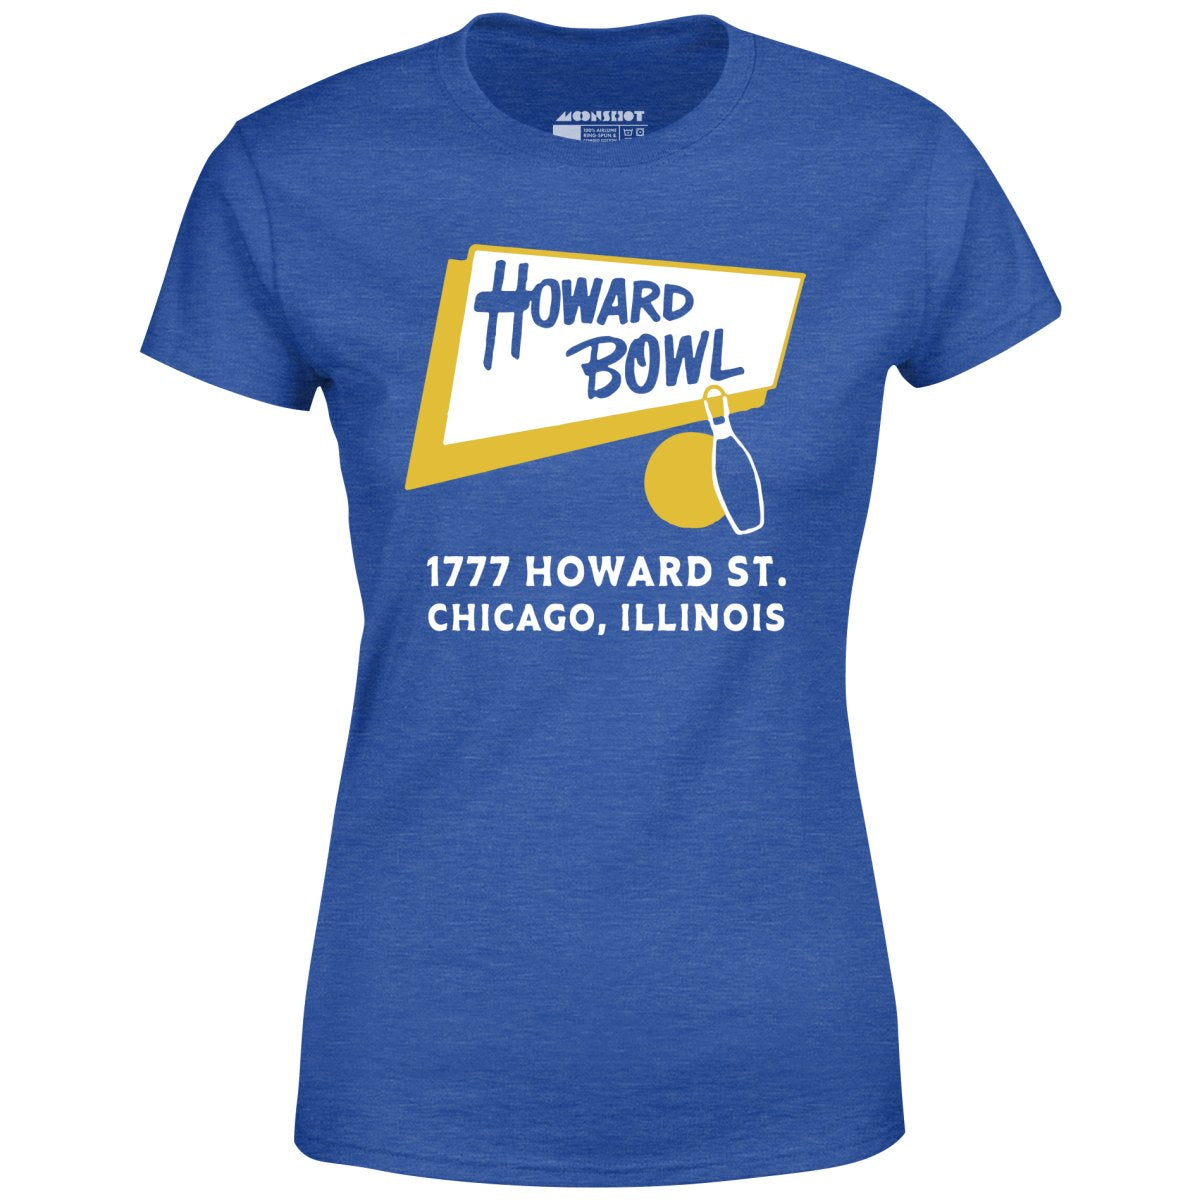 Howard Bowl - Chicago, IL - Vintage Bowling Alley - Women's T-Shirt